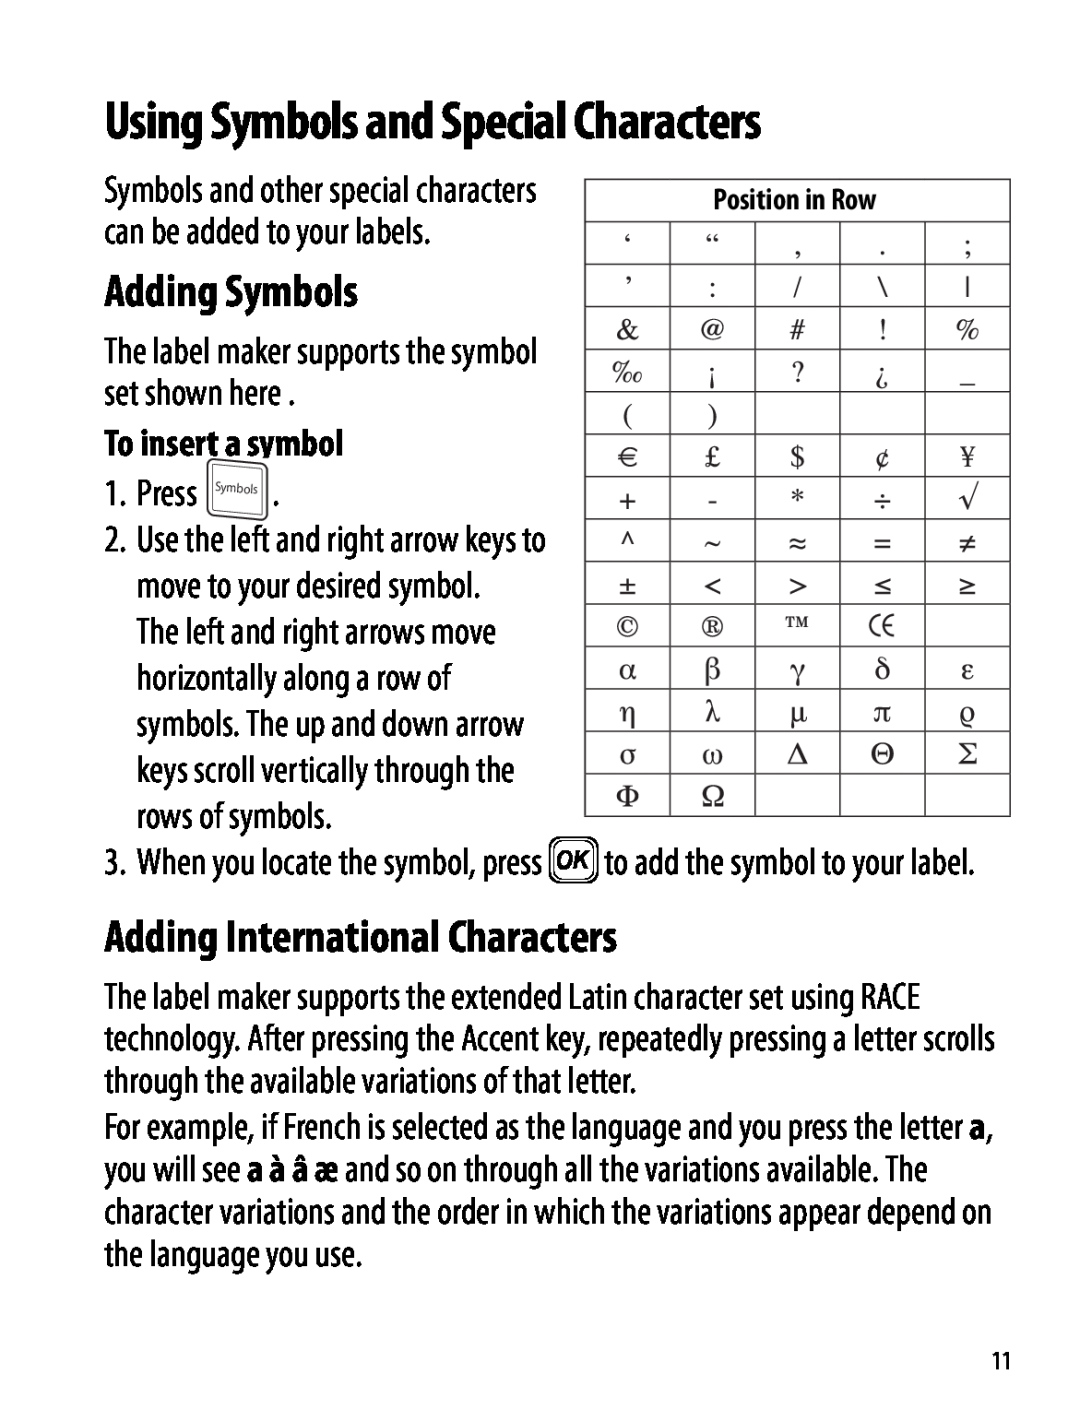 Dymo 120P manual Adding Symbols, Adding International Characters, To insert a symbol, Using Symbols and Special Characters 